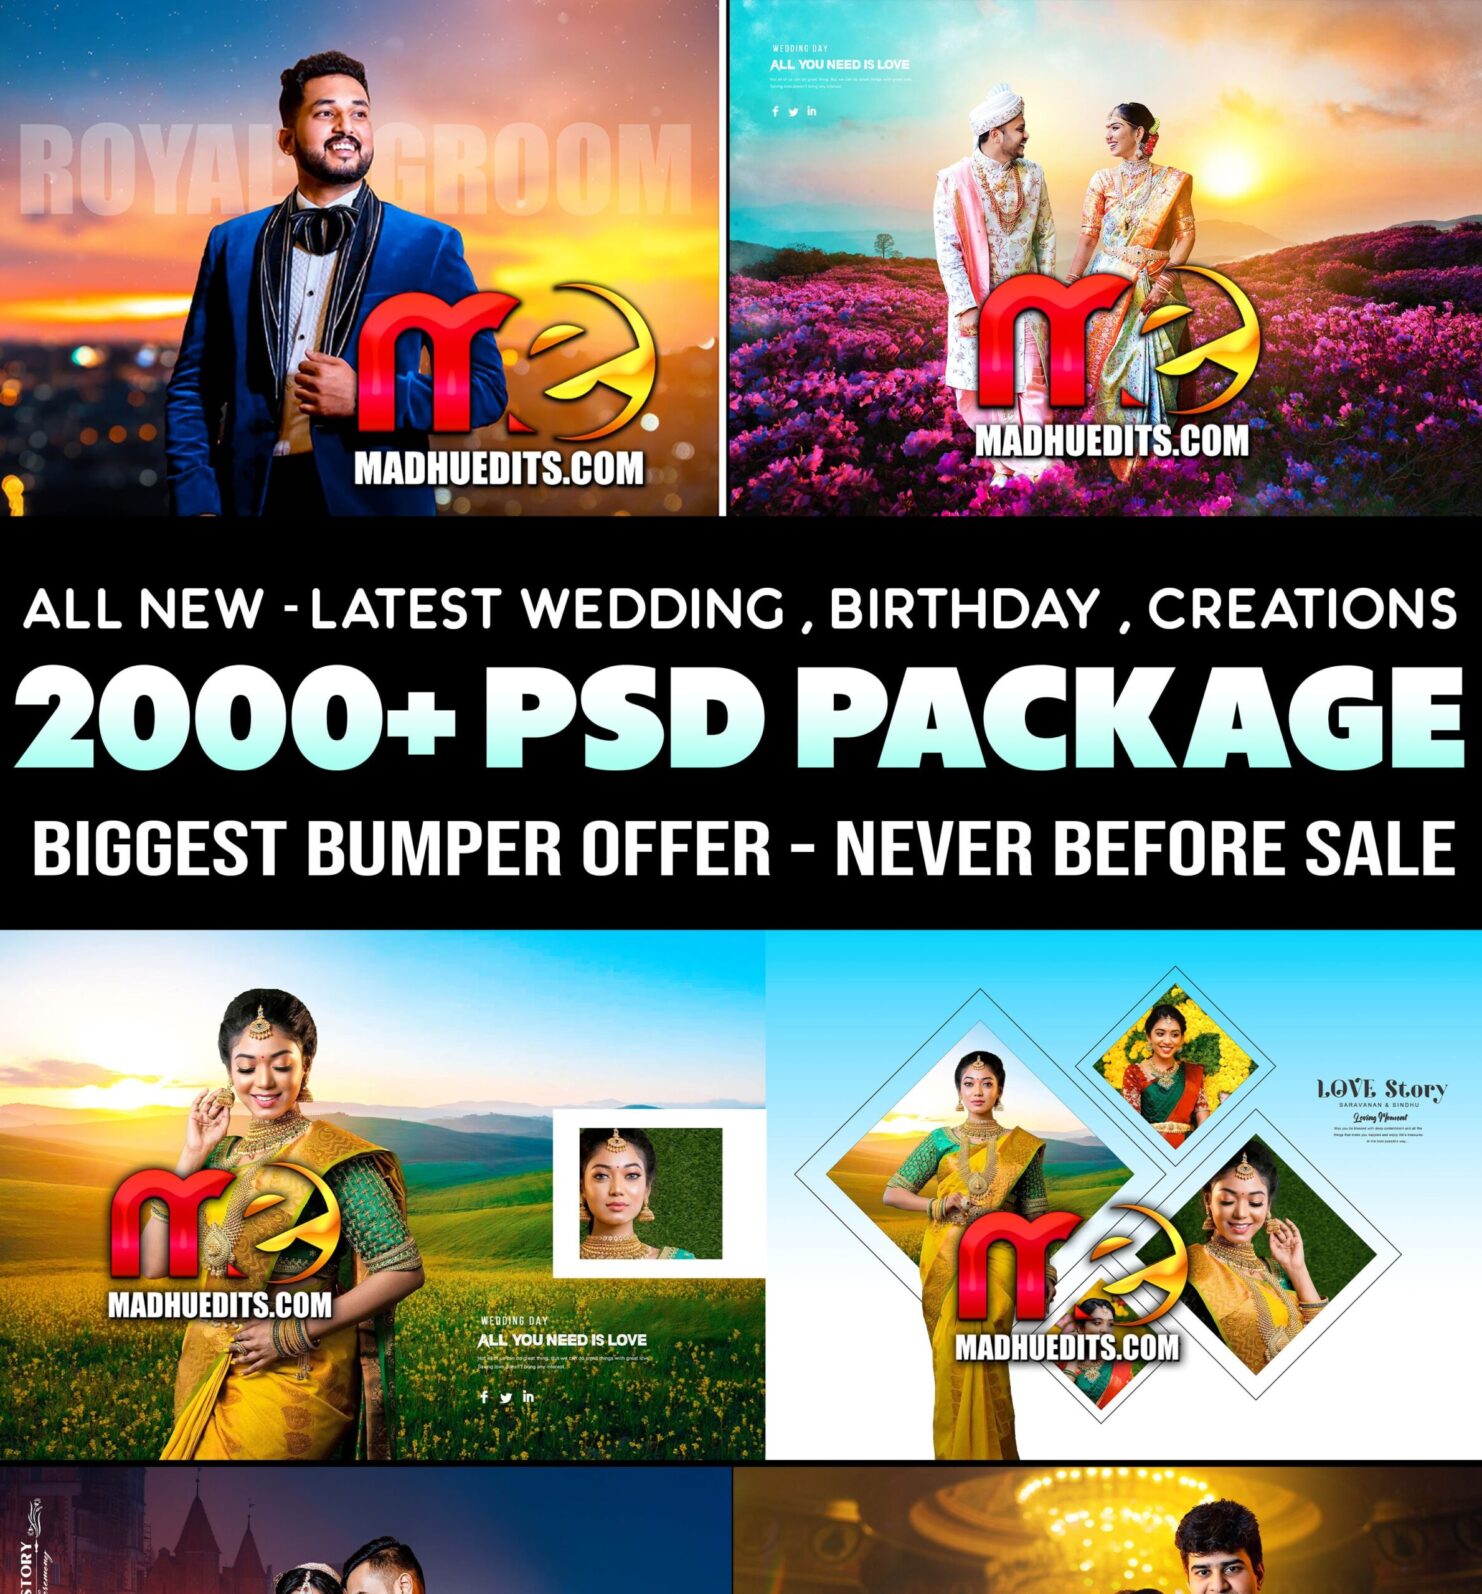 2000+ HIGH QUALITY PSD – PREMIUM BIG OFFER PACKAGE